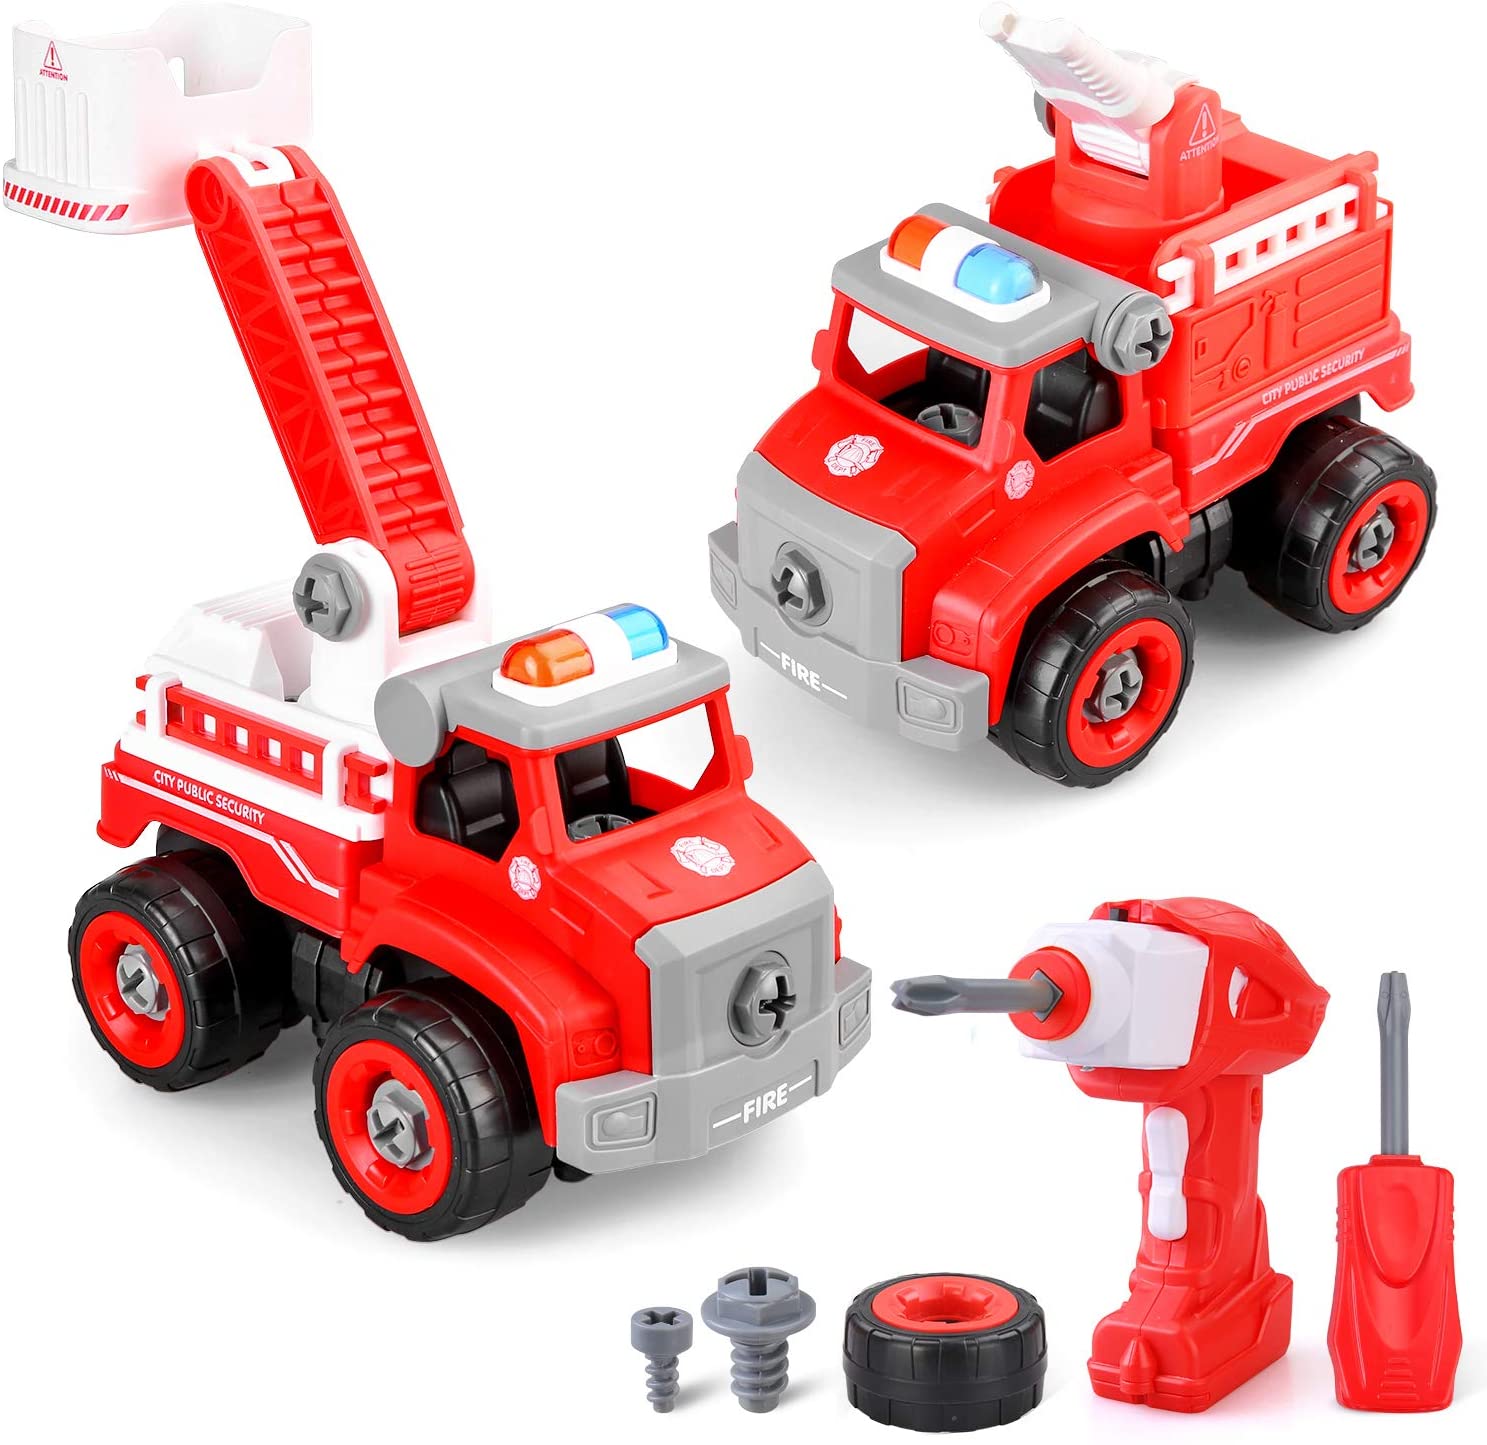 Best quality Plastic Animal Toy Set - BeebeeRun Take Apart Toys 2 in 1 Fire Truck Toy Sets,Converts to Remote Control Car,Educational Playset with Tools and Power Drill,Kids Stem Building Toy,Gift...